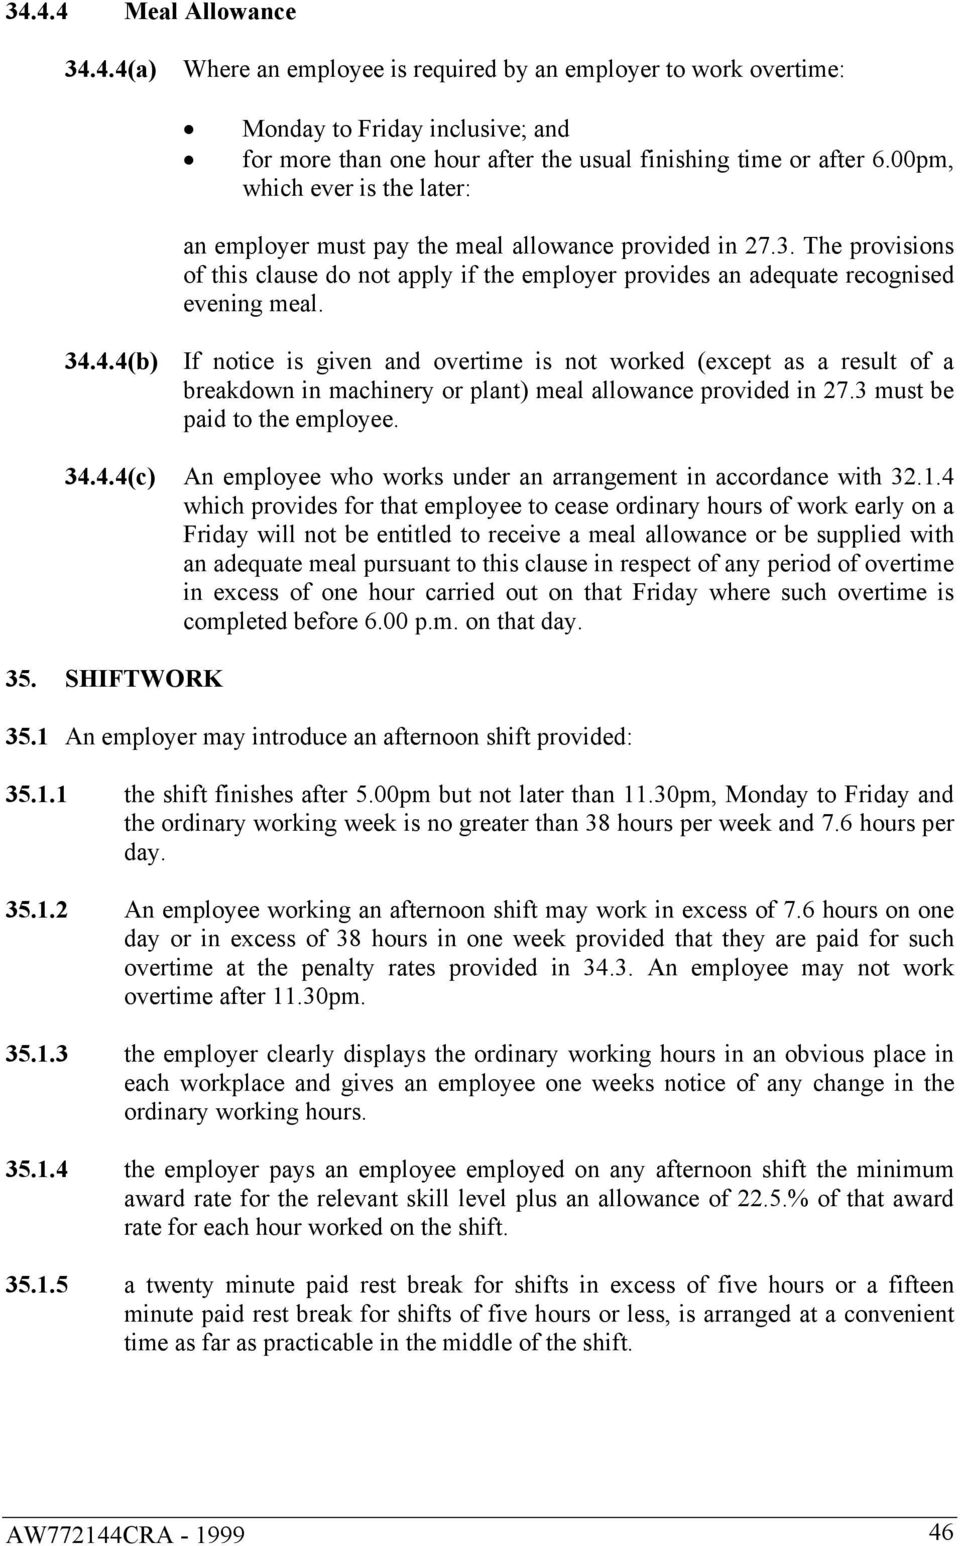 4.4(b) If notice is given and overtime is not worked (except as a result of a breakdown in machinery or plant) meal allowance provided in 27.3 must be paid to the employee. 34.4.4(c) An employee who works under an arrangement in accordance with 32.